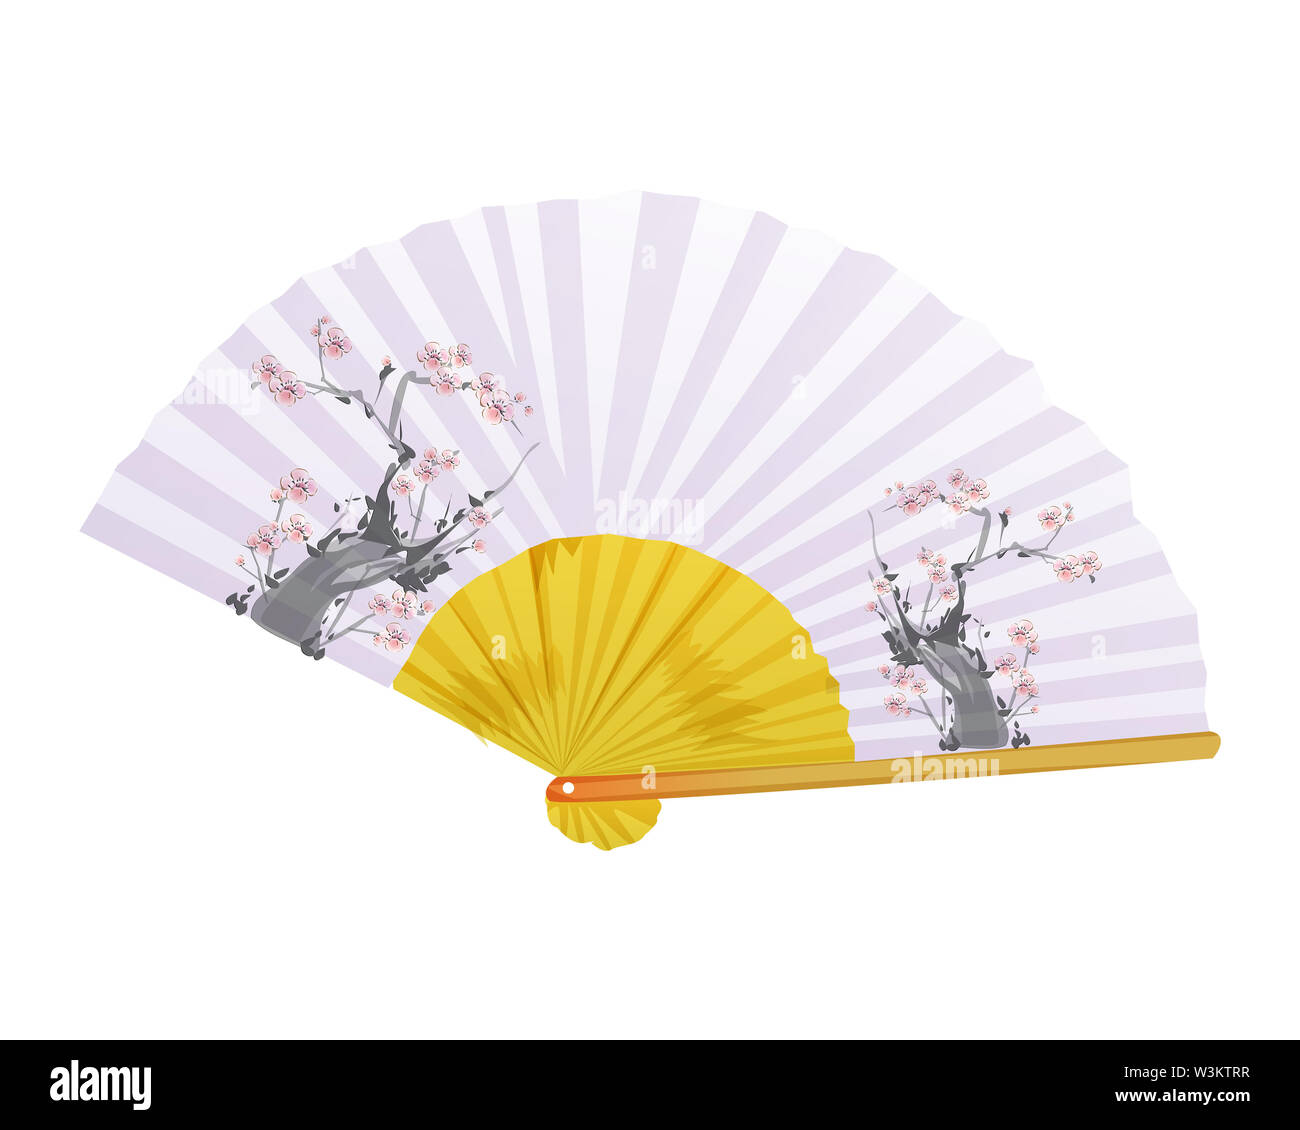 Japanese Open Hand Fan Isolated on a White Background. Stock Photo